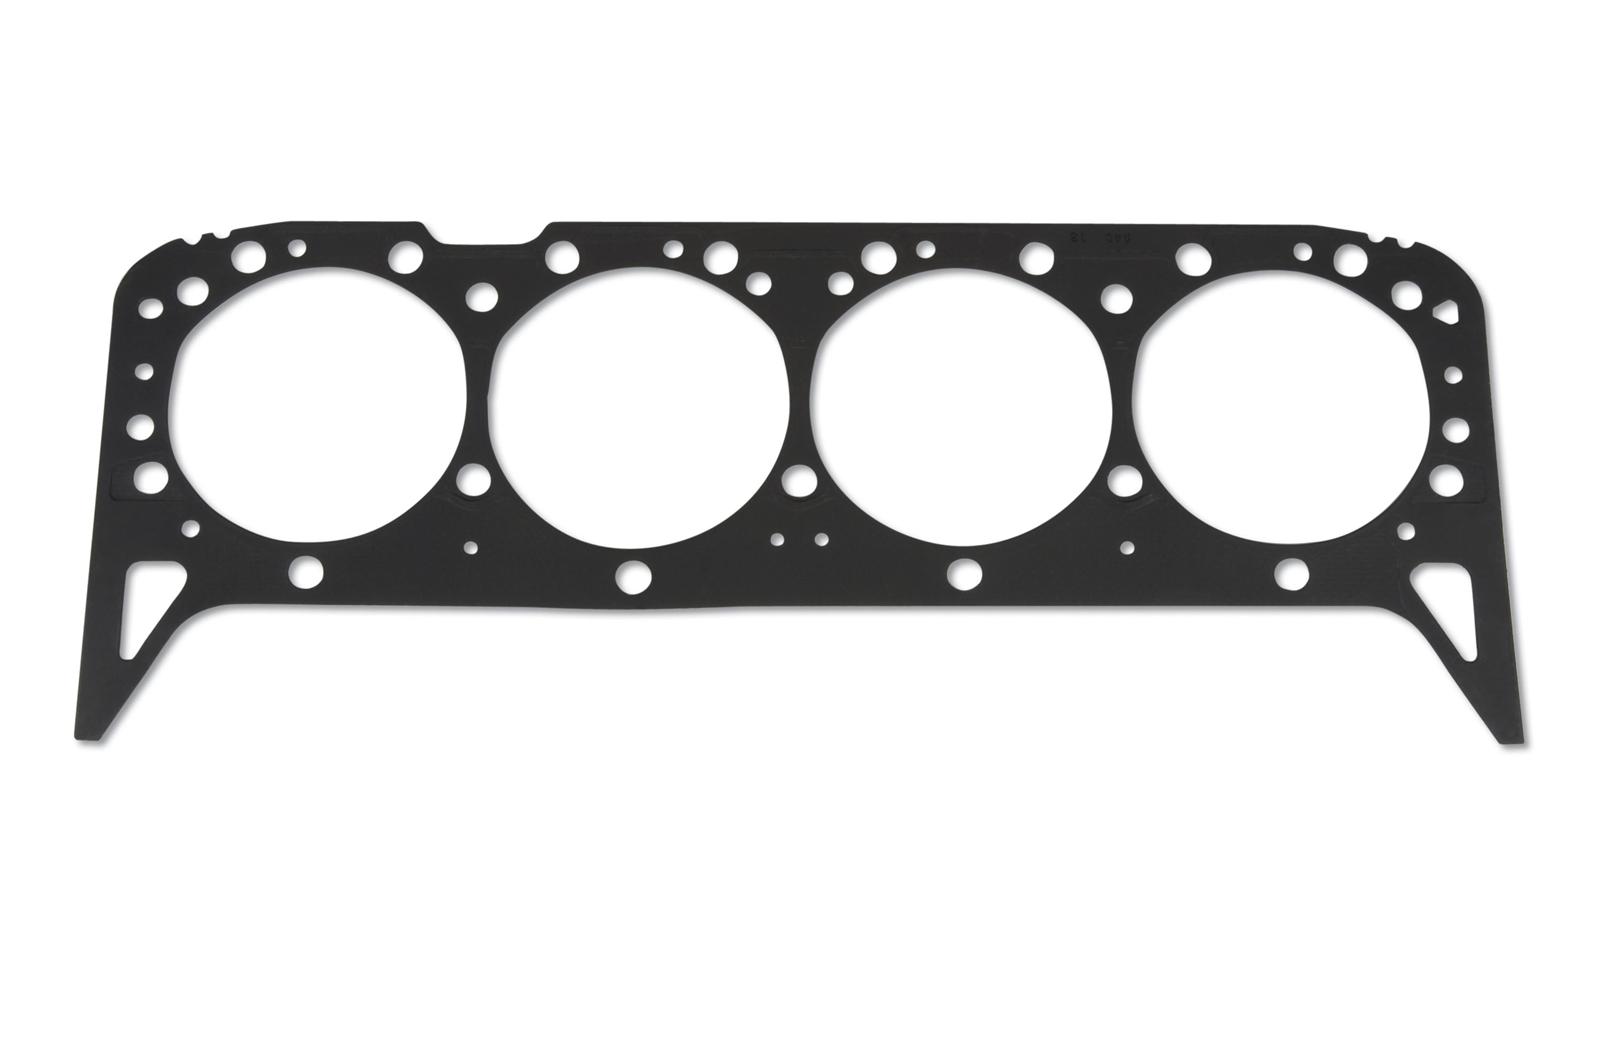 Corvair & Forward Control cylinder head gaskets package of 6 GM 3856720